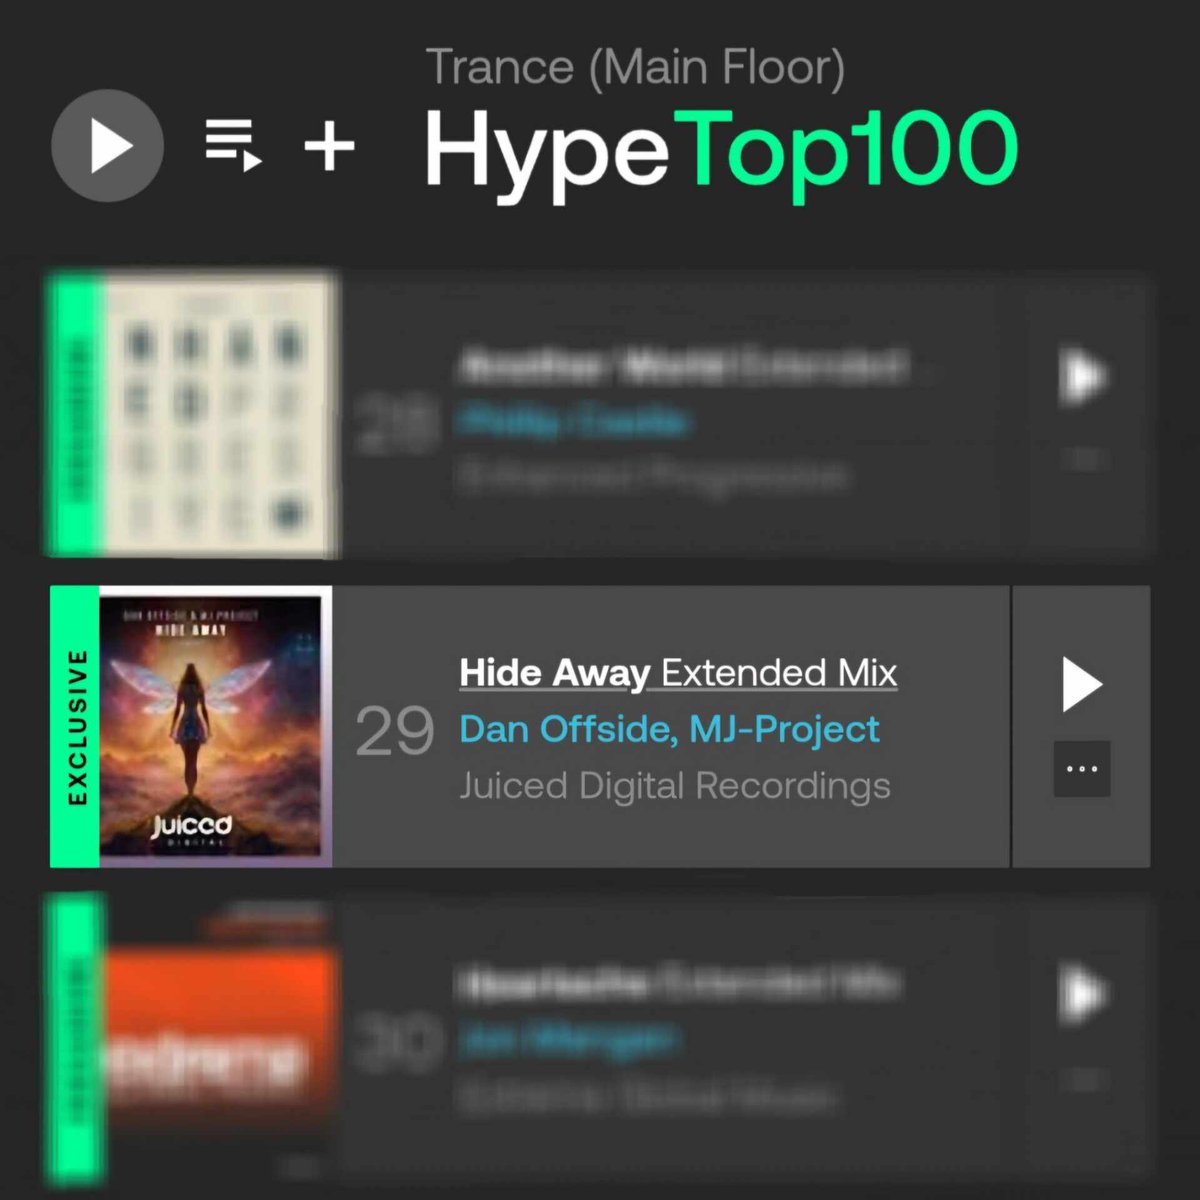 Climbing again to no. 29 in @beatport trance hype chart Dan Offside & MJ Project - Hide Away Buy here: juiceddigital.ampsuite.com/releases/links… Released by: Juiced Digital #trance #trancefamily #fypシ゚ #techtrance #upliftingtrance #juicedpure #releaseday #beatport #juiceddigital #vocaltrance